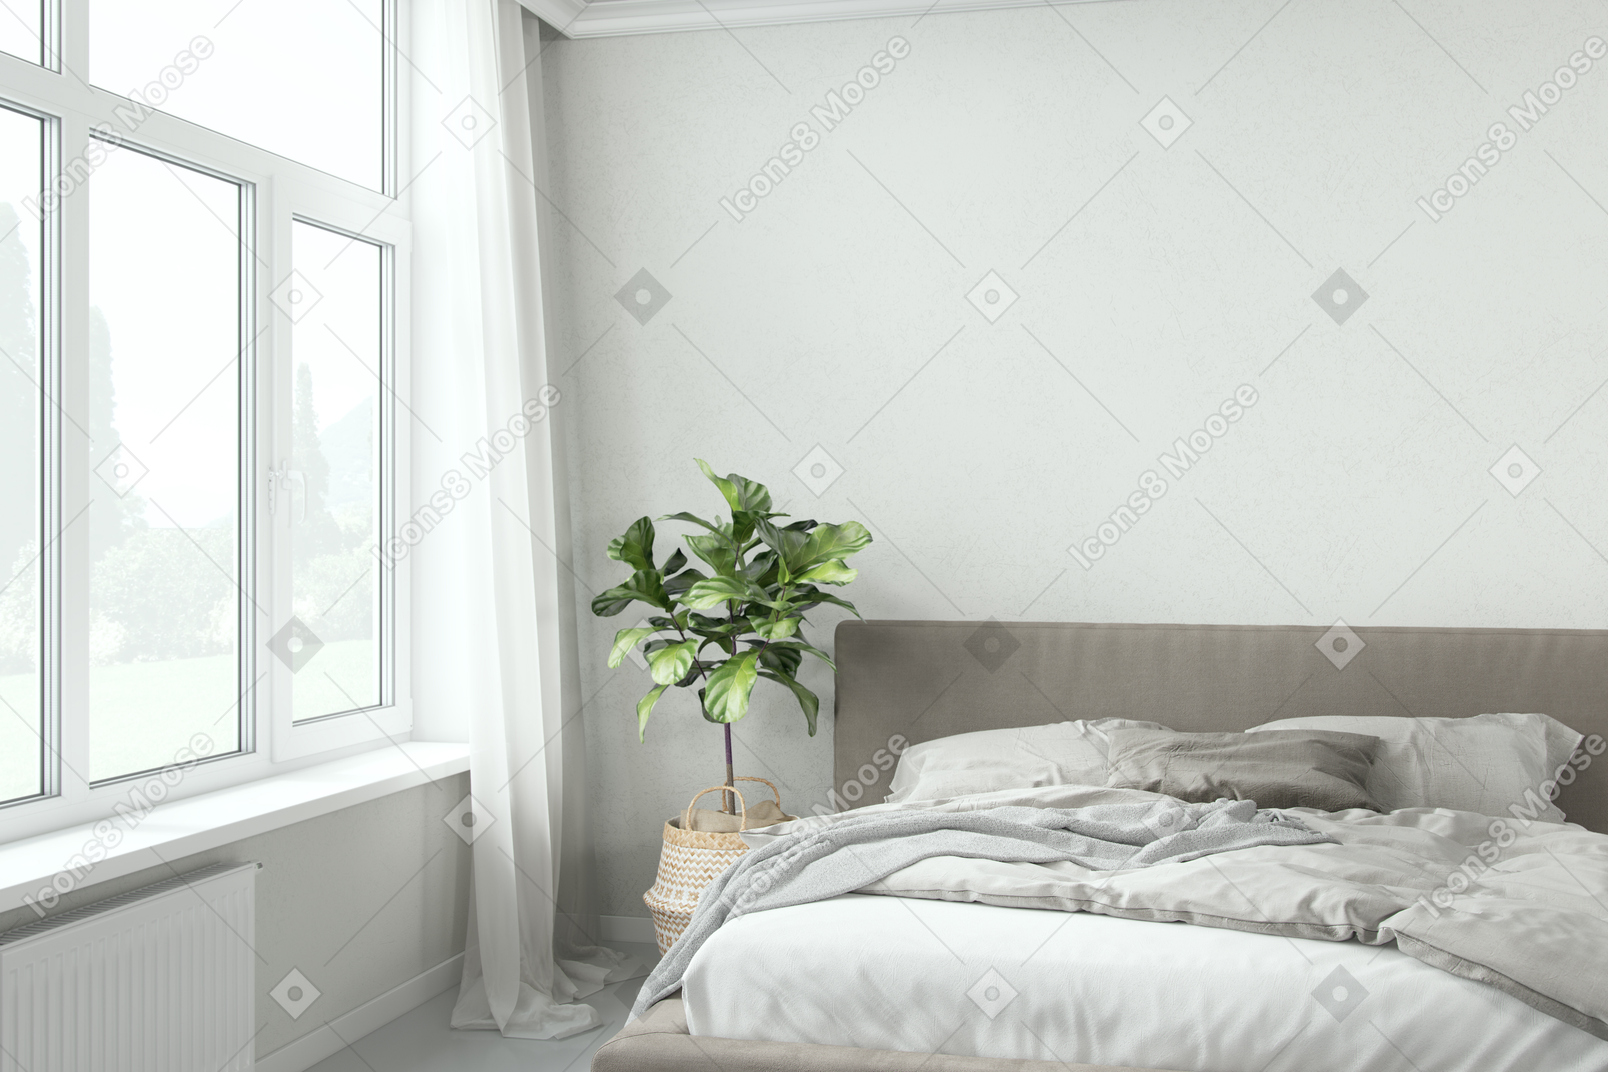 Empty bedroom at daytime